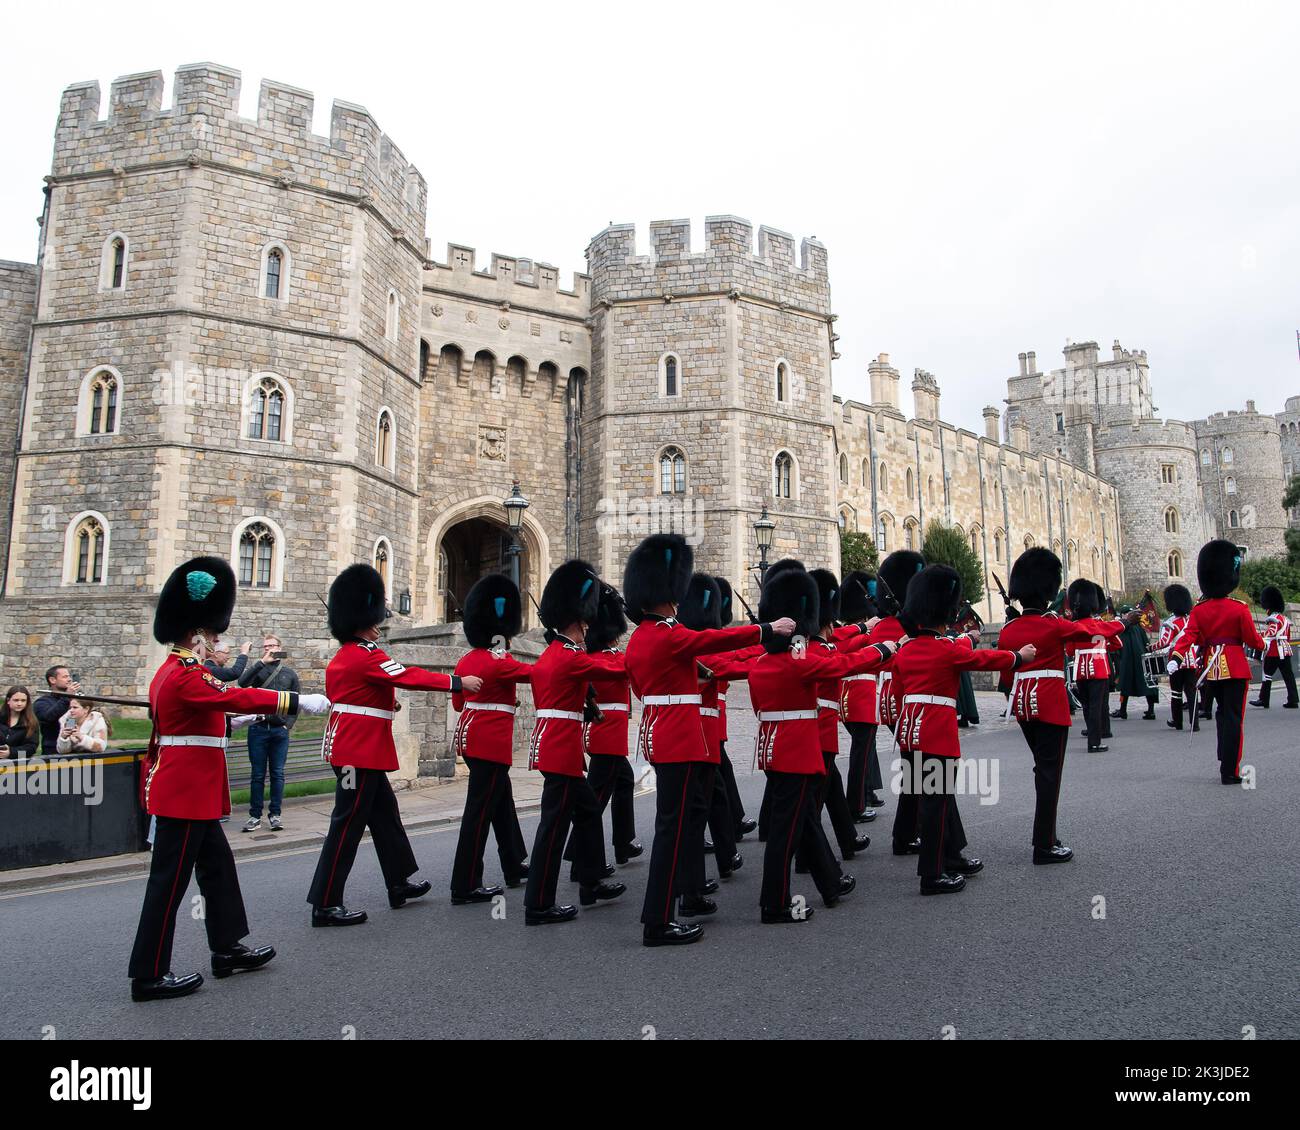 Windsor, Berkshire, UK. 27th September, 2022. The Changing of the Guard is now taking place again following the end of the Official Mourning Period after the death of Queen Elizabeth II. The Changing of the Guard today was by the Windsor Castle Guard, 12 Company Irish Guards with musical support by the Pipes of the 1st Battalion Irish Guards. Credit: Maureen McLean/Alamy Live News Stock Photo